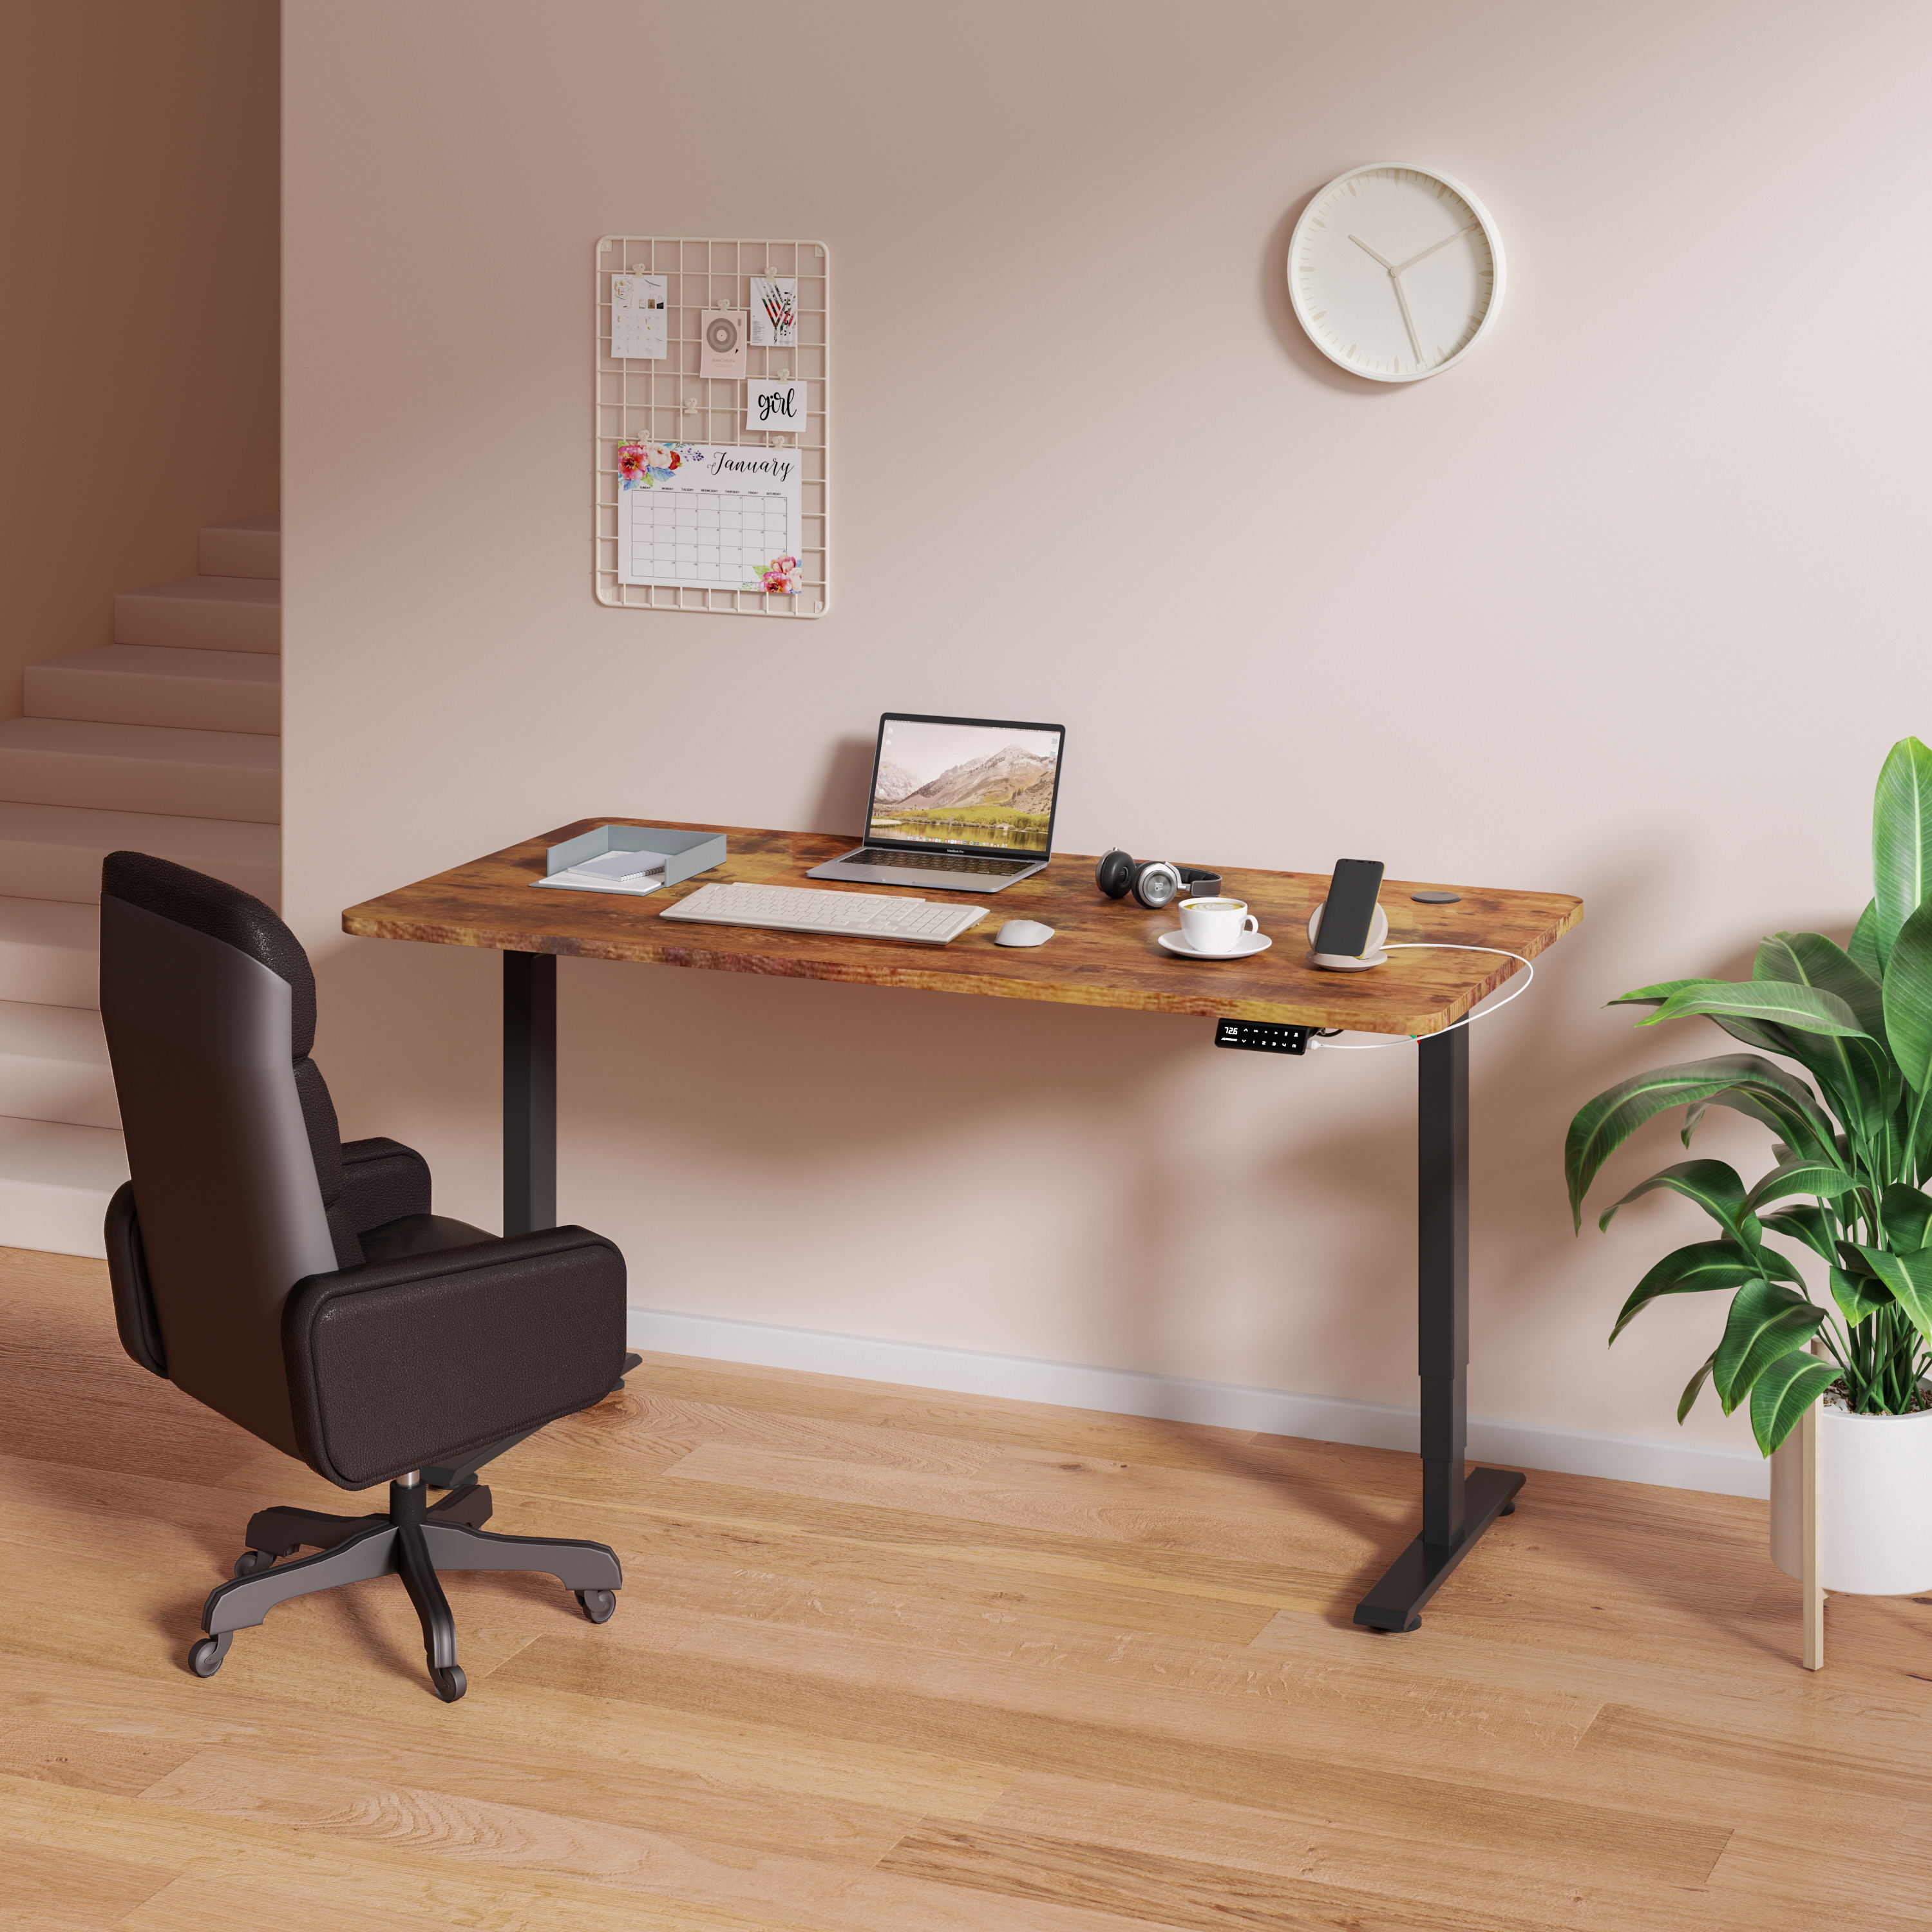 Maidesite electric desk for home office people work with it in the living room